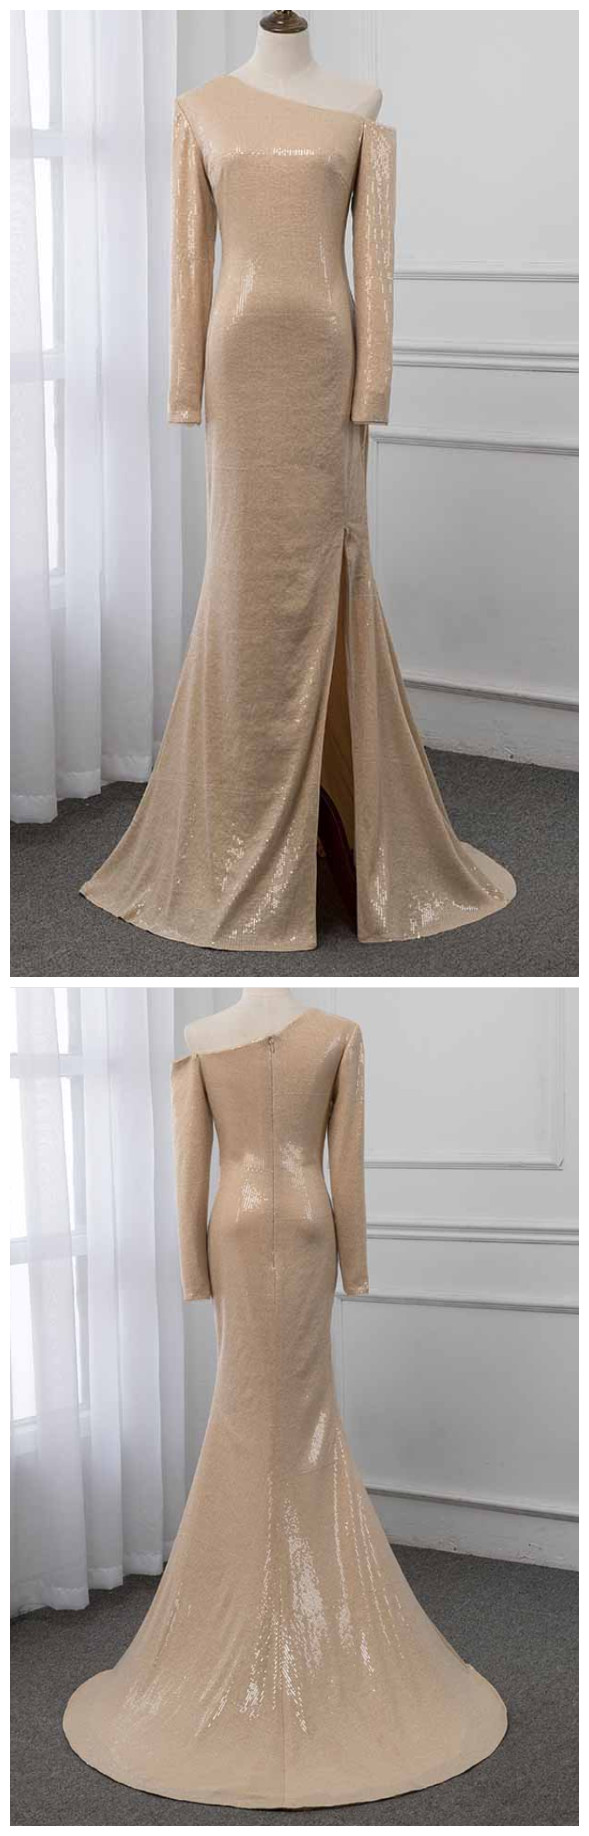 Ruby Outfit 2020 One Shoulder Long Sleeve Prom Dresses Formal Evening Gown Dress Champagne Sequins